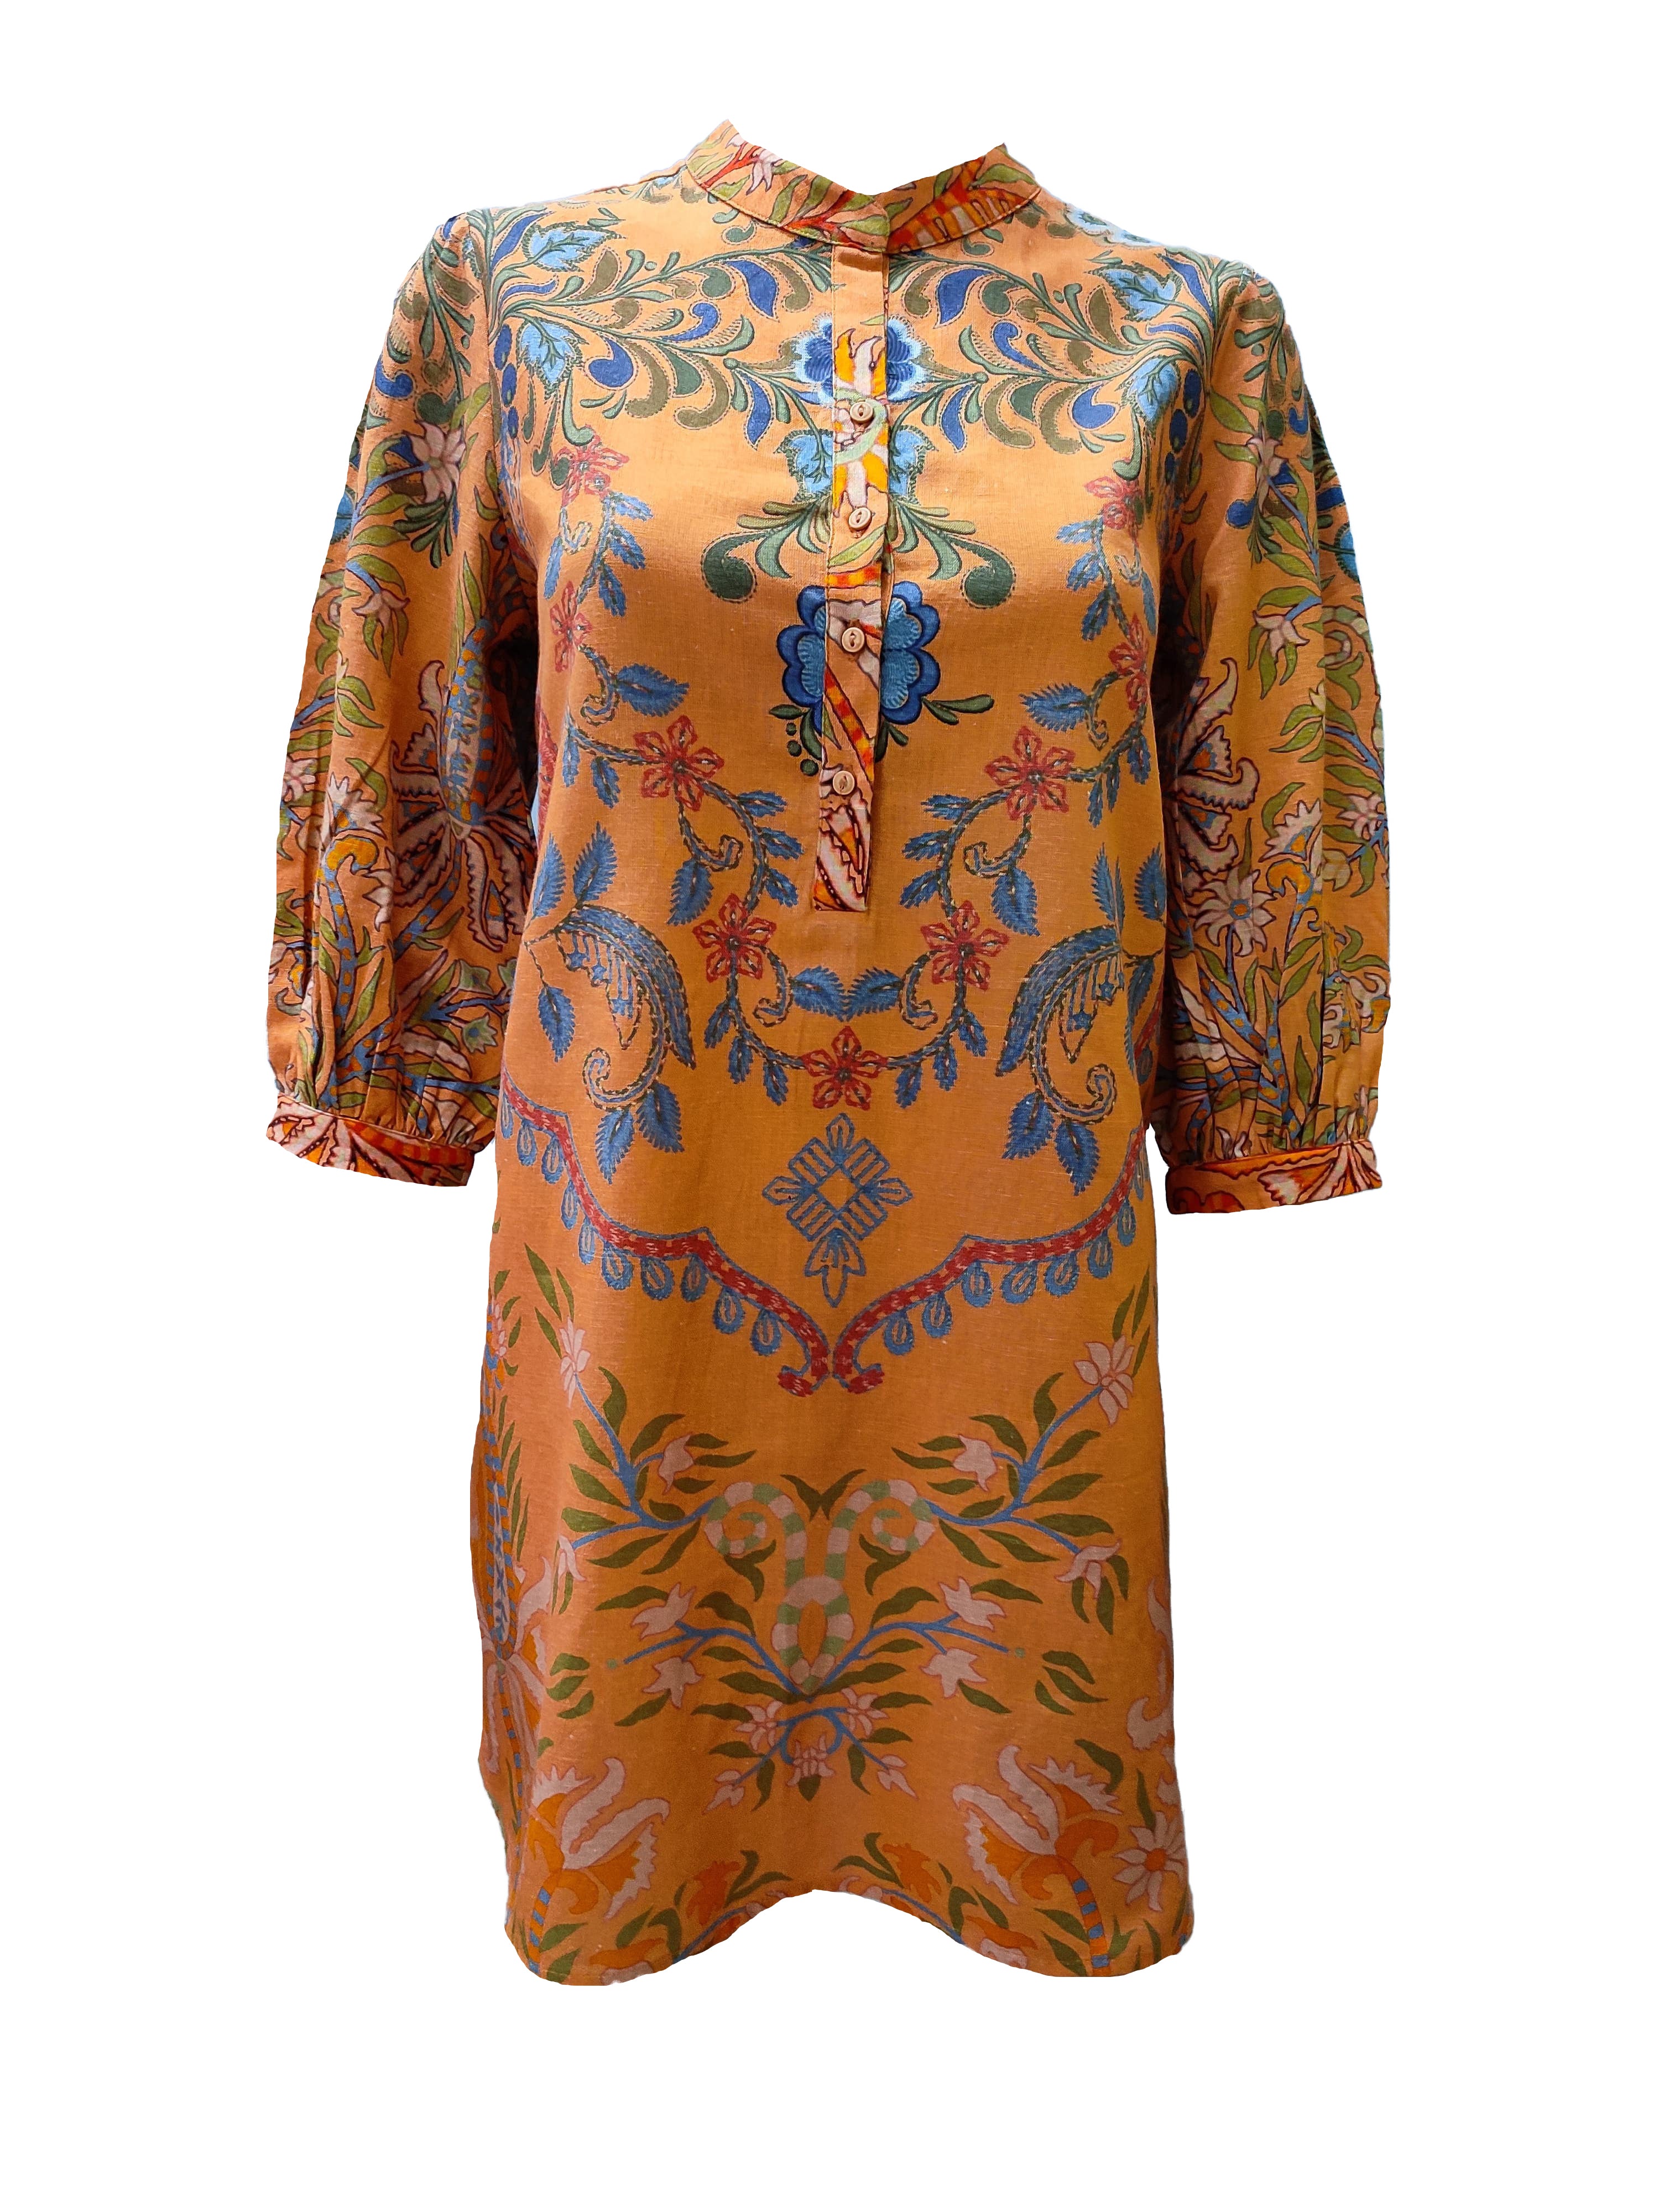 PRINTED VOILET TUNIC